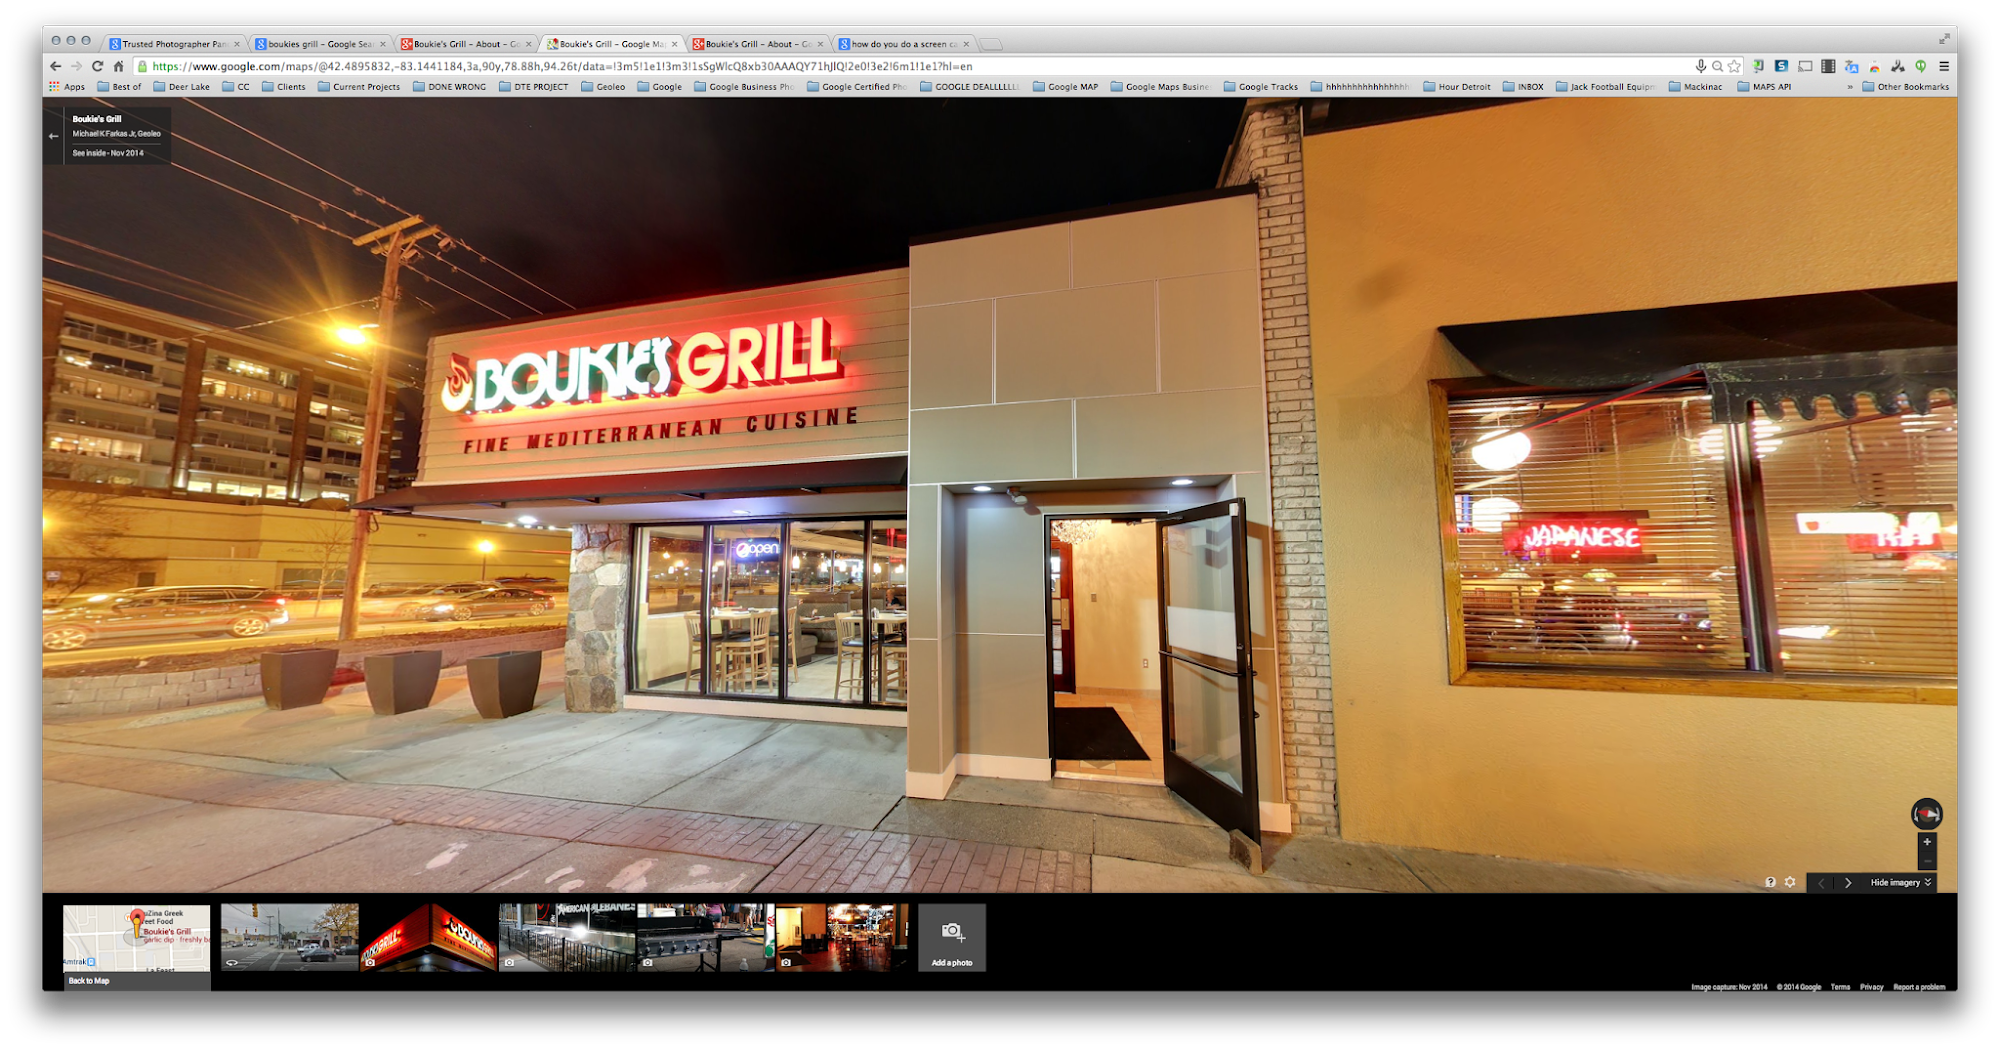 Boukie's Grill